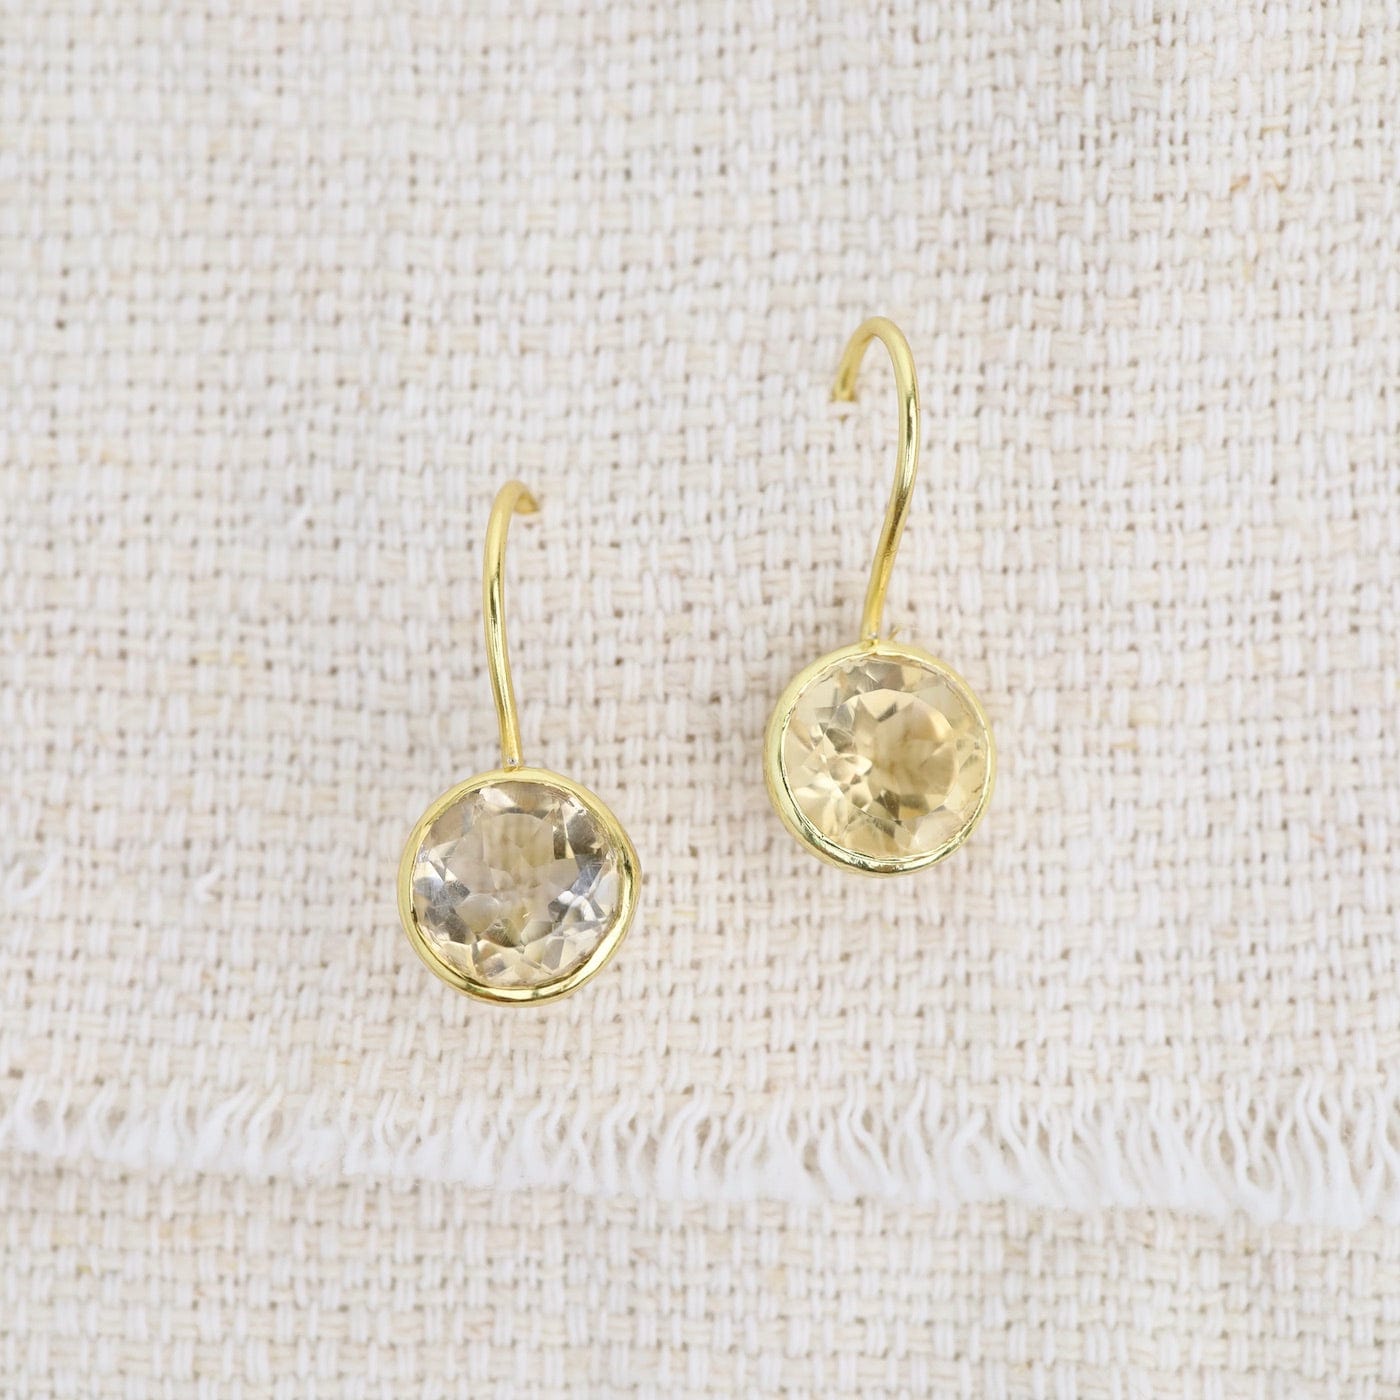 EAR-GPL Round Natural Citrine Earring